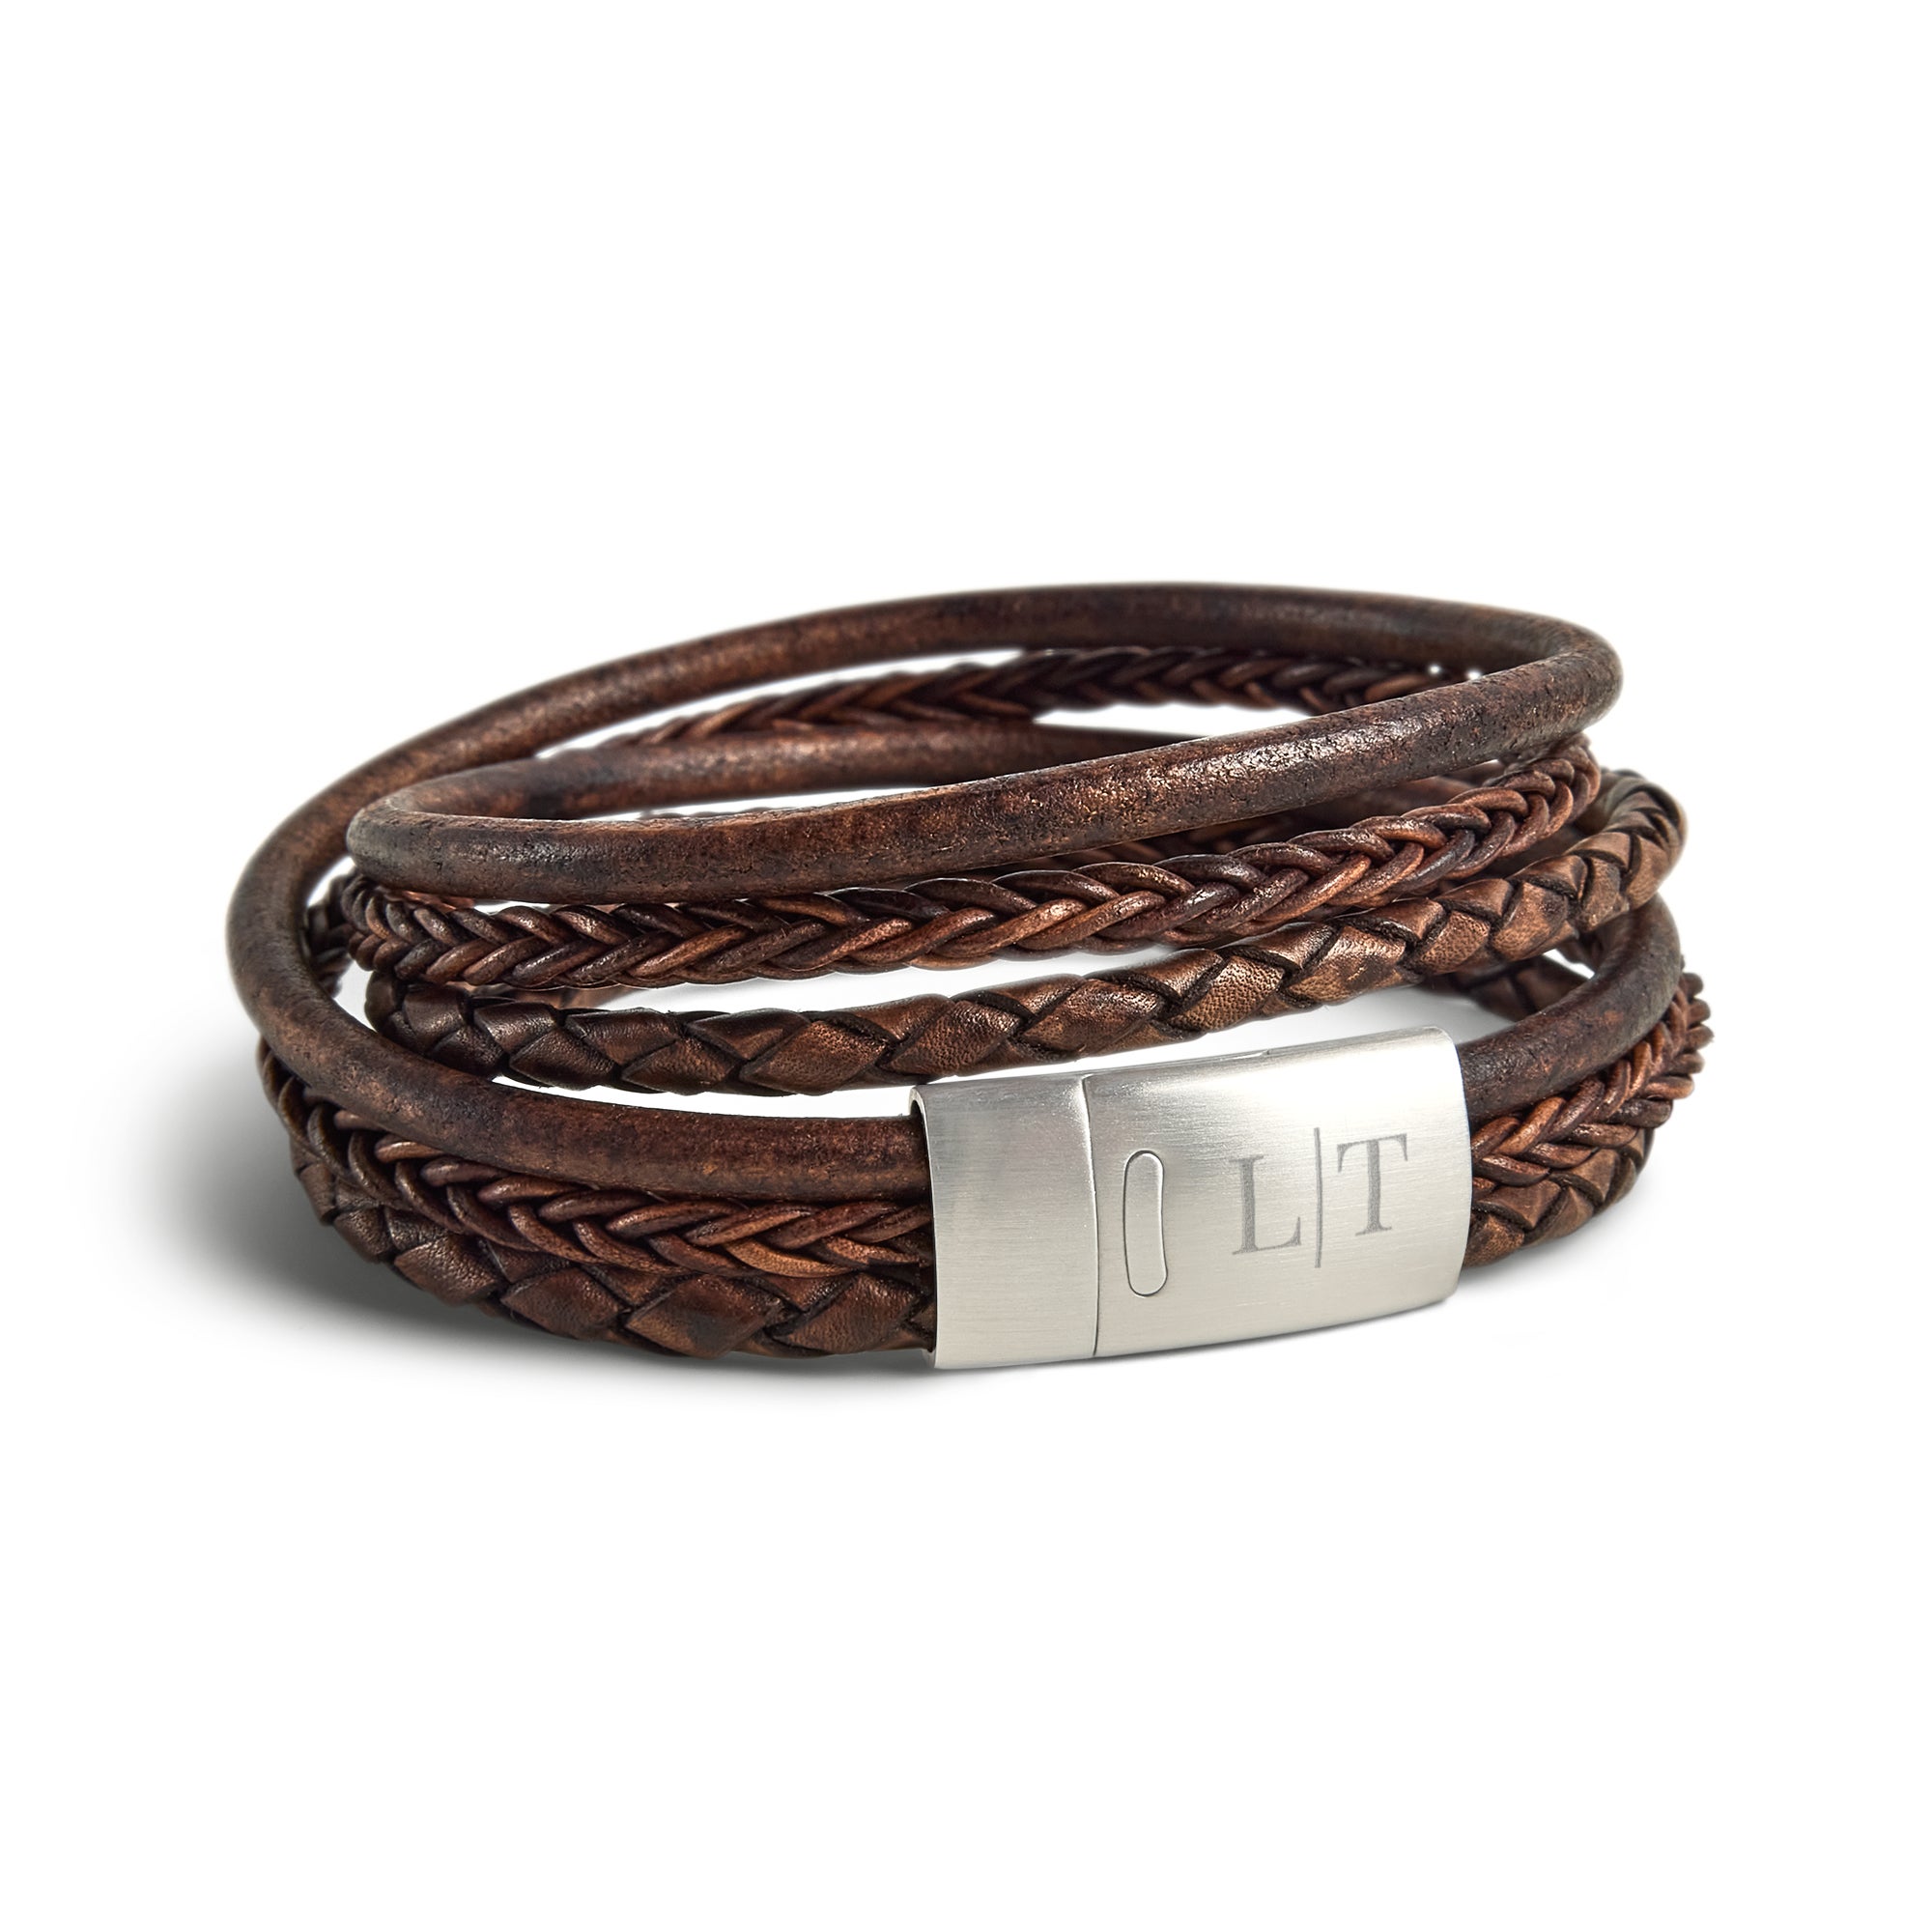 Luxurious double leather bracelet with engraving - Men - Brown - L